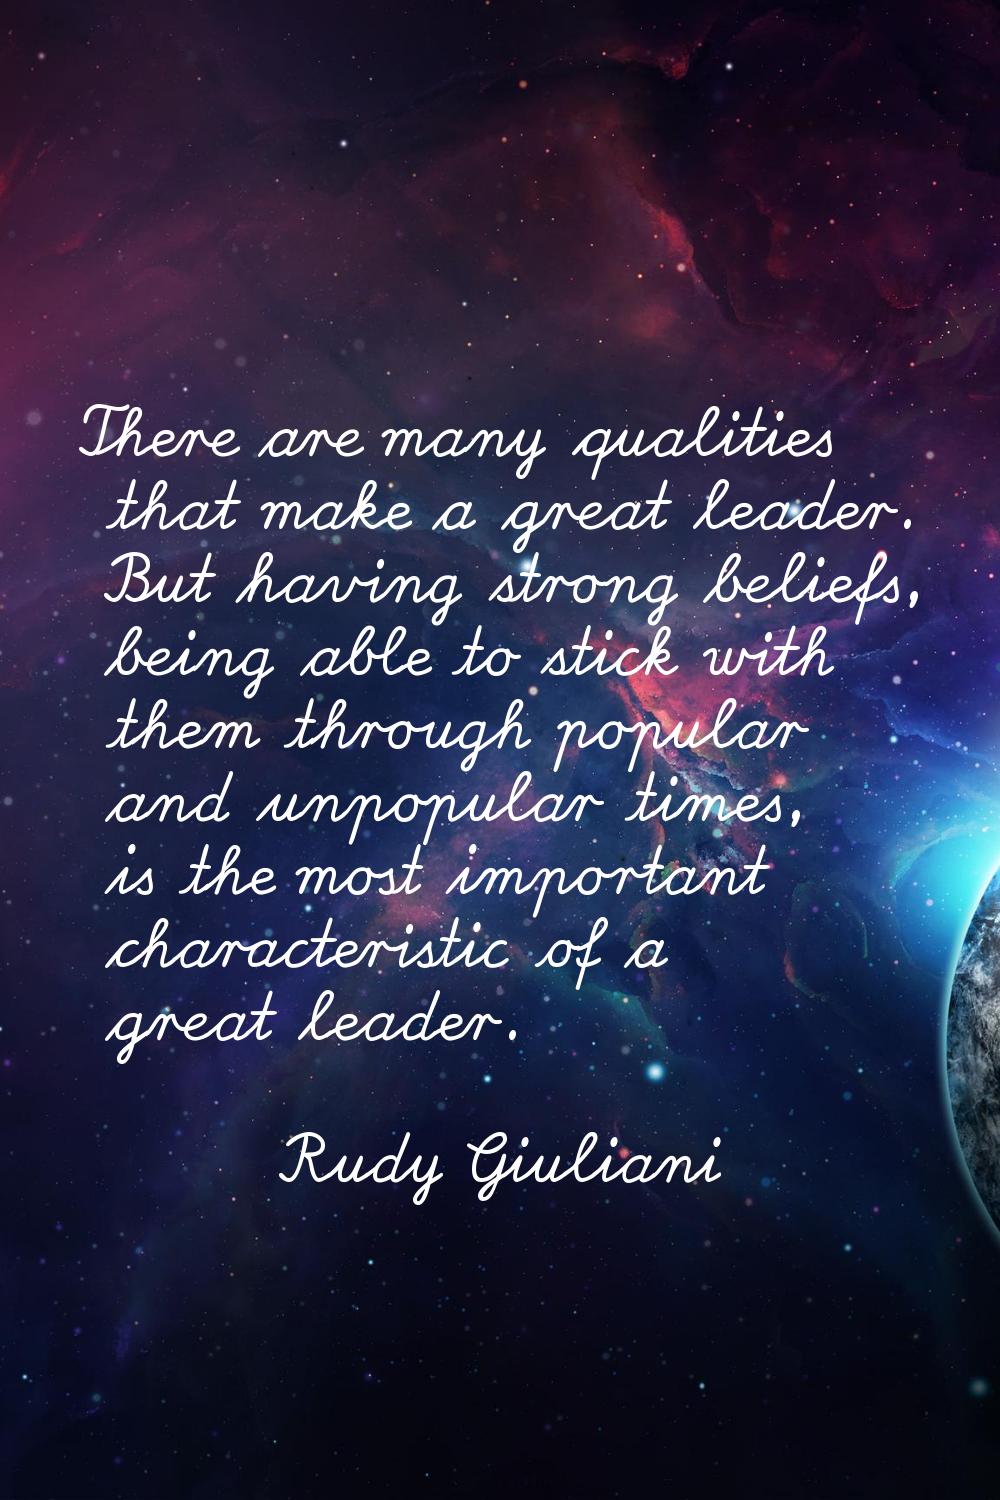 There are many qualities that make a great leader. But having strong beliefs, being able to stick w